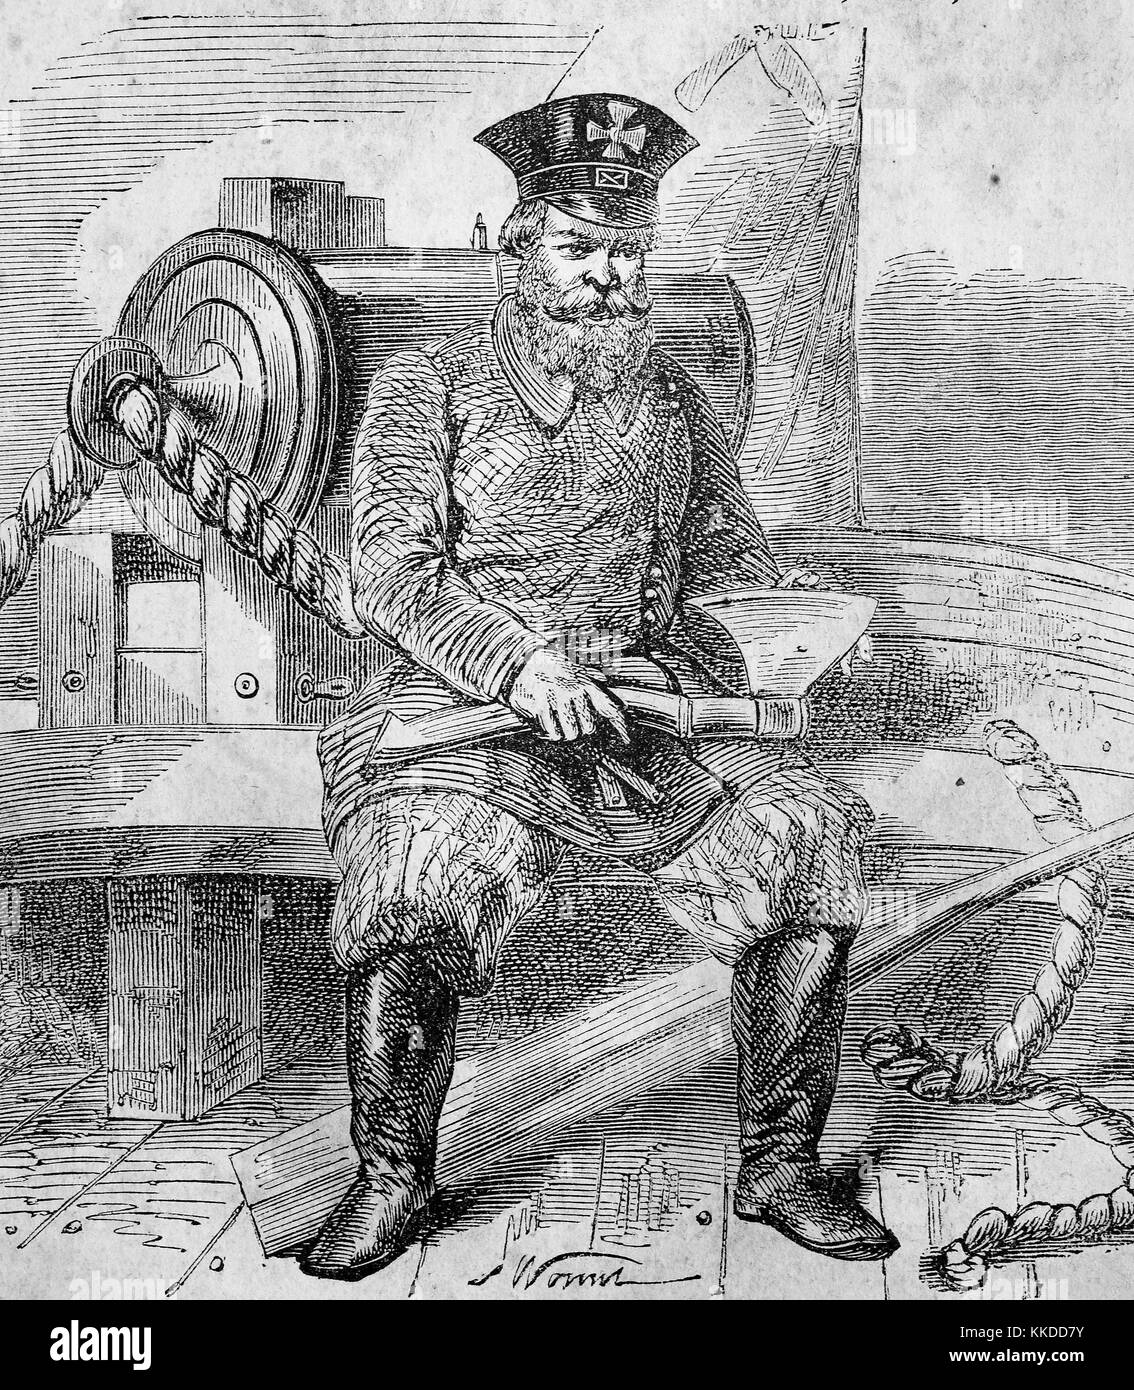 Man in the uniform of the Sea Realm Defence with hatchet, pictures of the time of 1855, Digital improved reproduction of an original woodcut Stock Photo